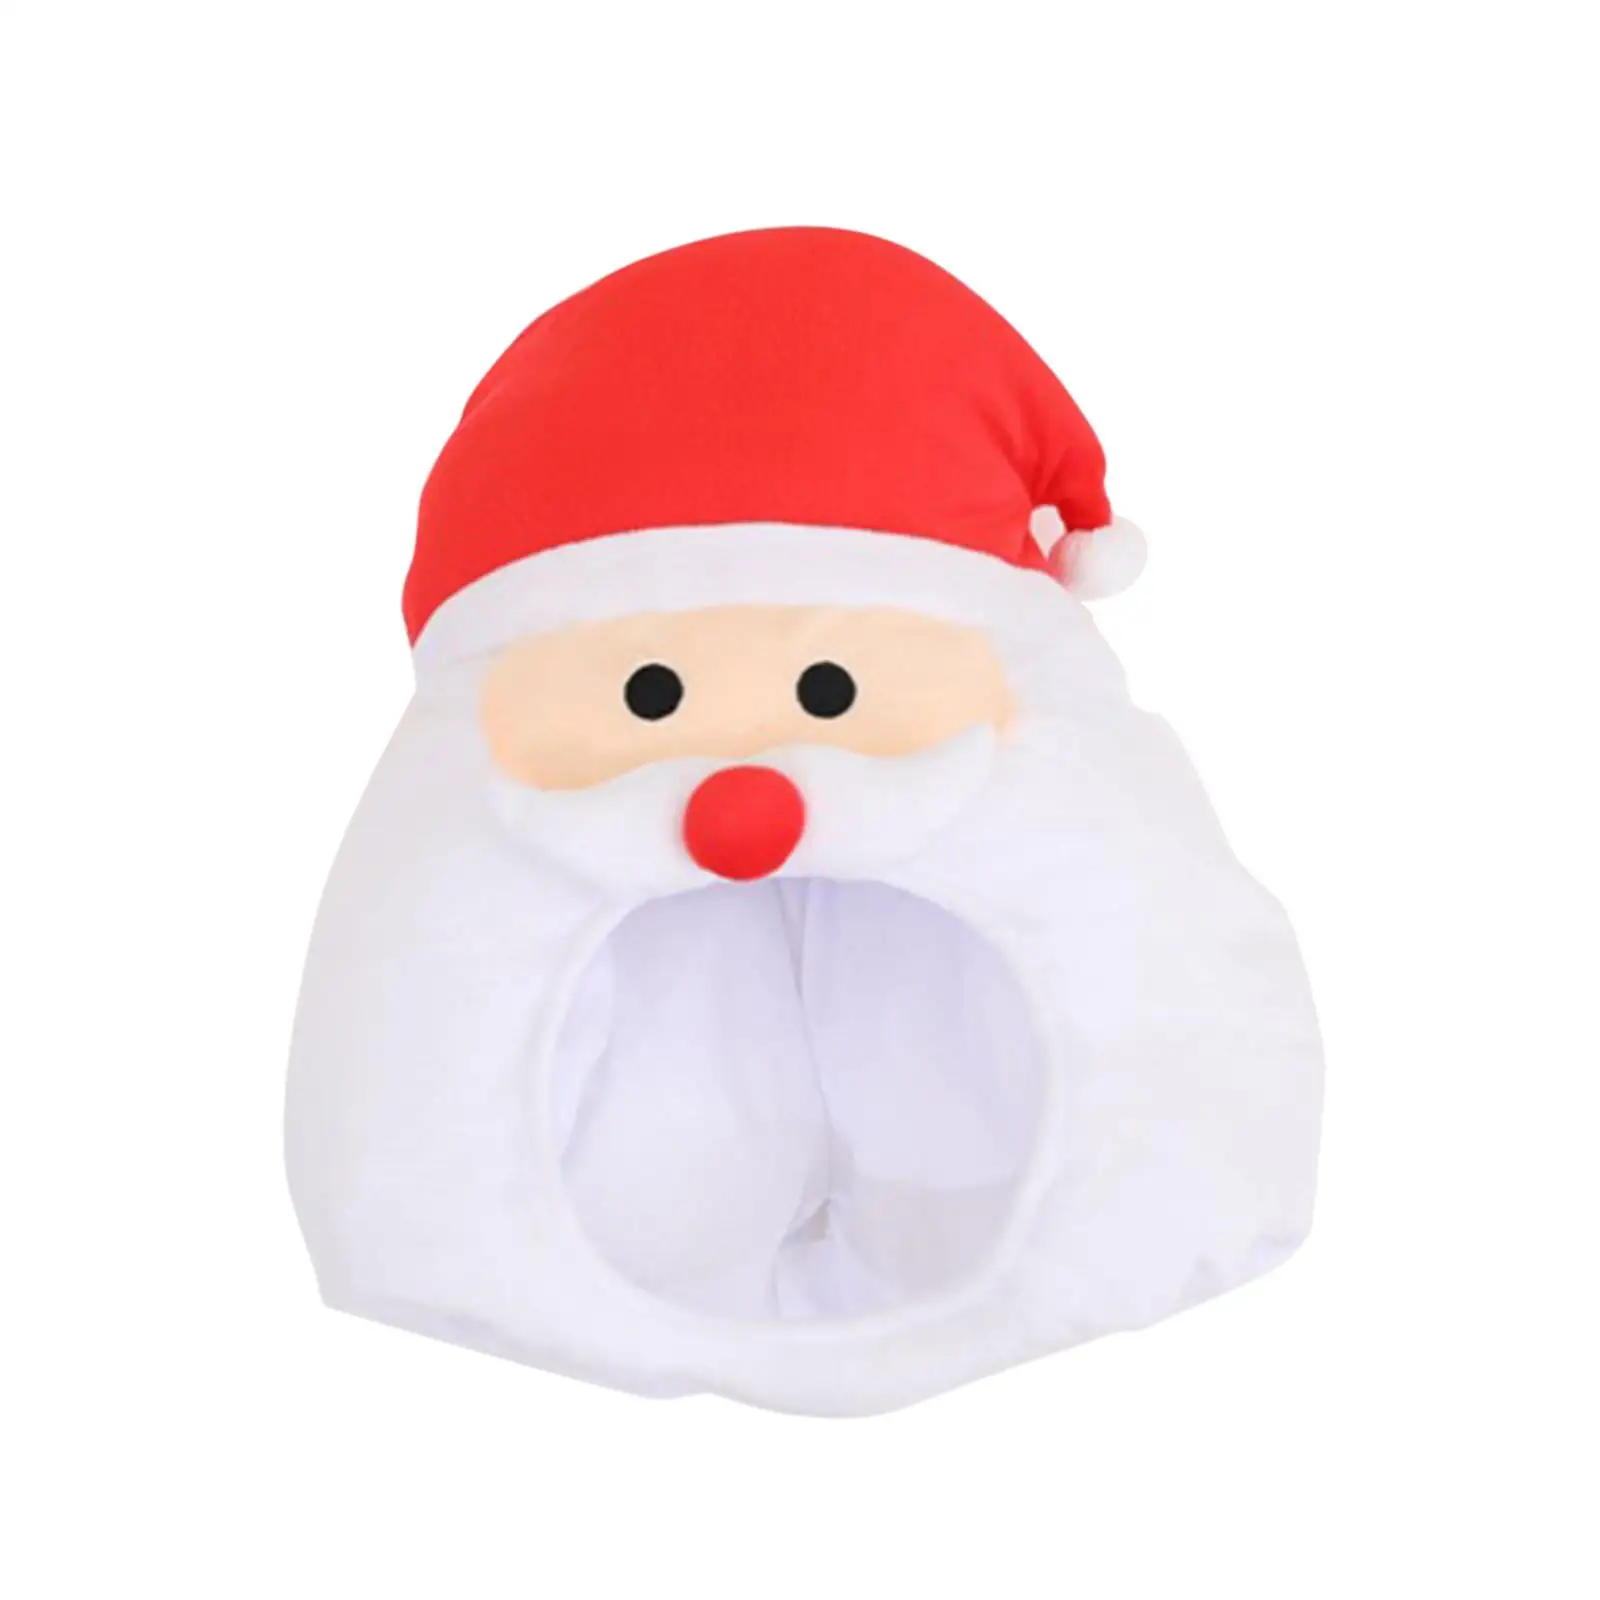 Santa Claus Hat Soft Plush Hat Fancy Dress Lovely Party Hat for Festival Role Play Stage Performance New Year Photo Props